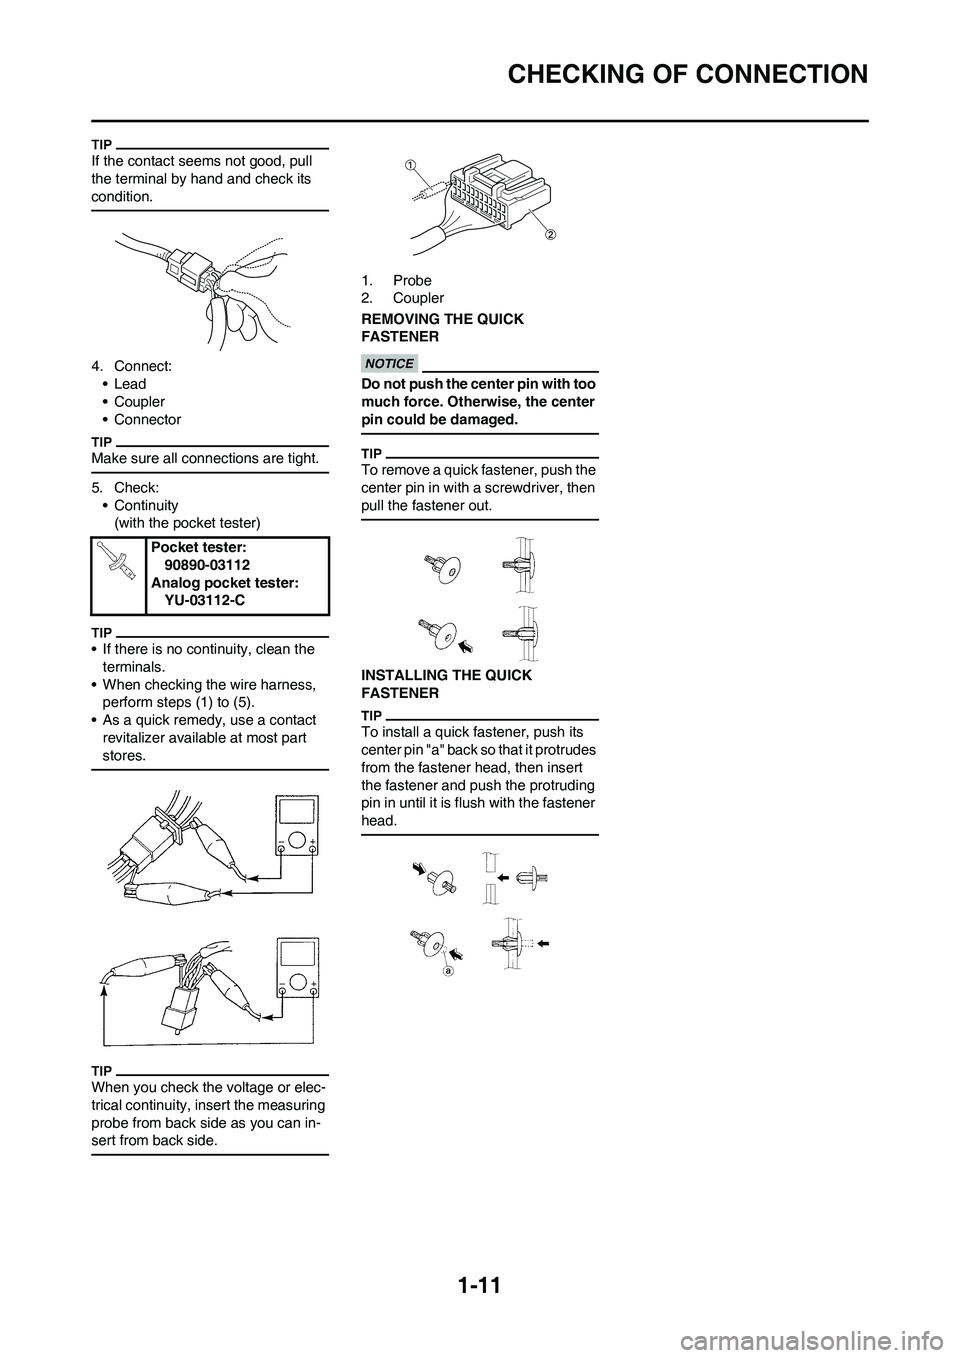 YAMAHA YZ450F 2010 Owners Manual 1-11
CHECKING OF CONNECTION
If the contact seems not good, pull 
the terminal by hand and check its 
condition.
4. Connect:
•Lead
• Coupler
• Connector
Make sure all connections are tight.
5. Ch